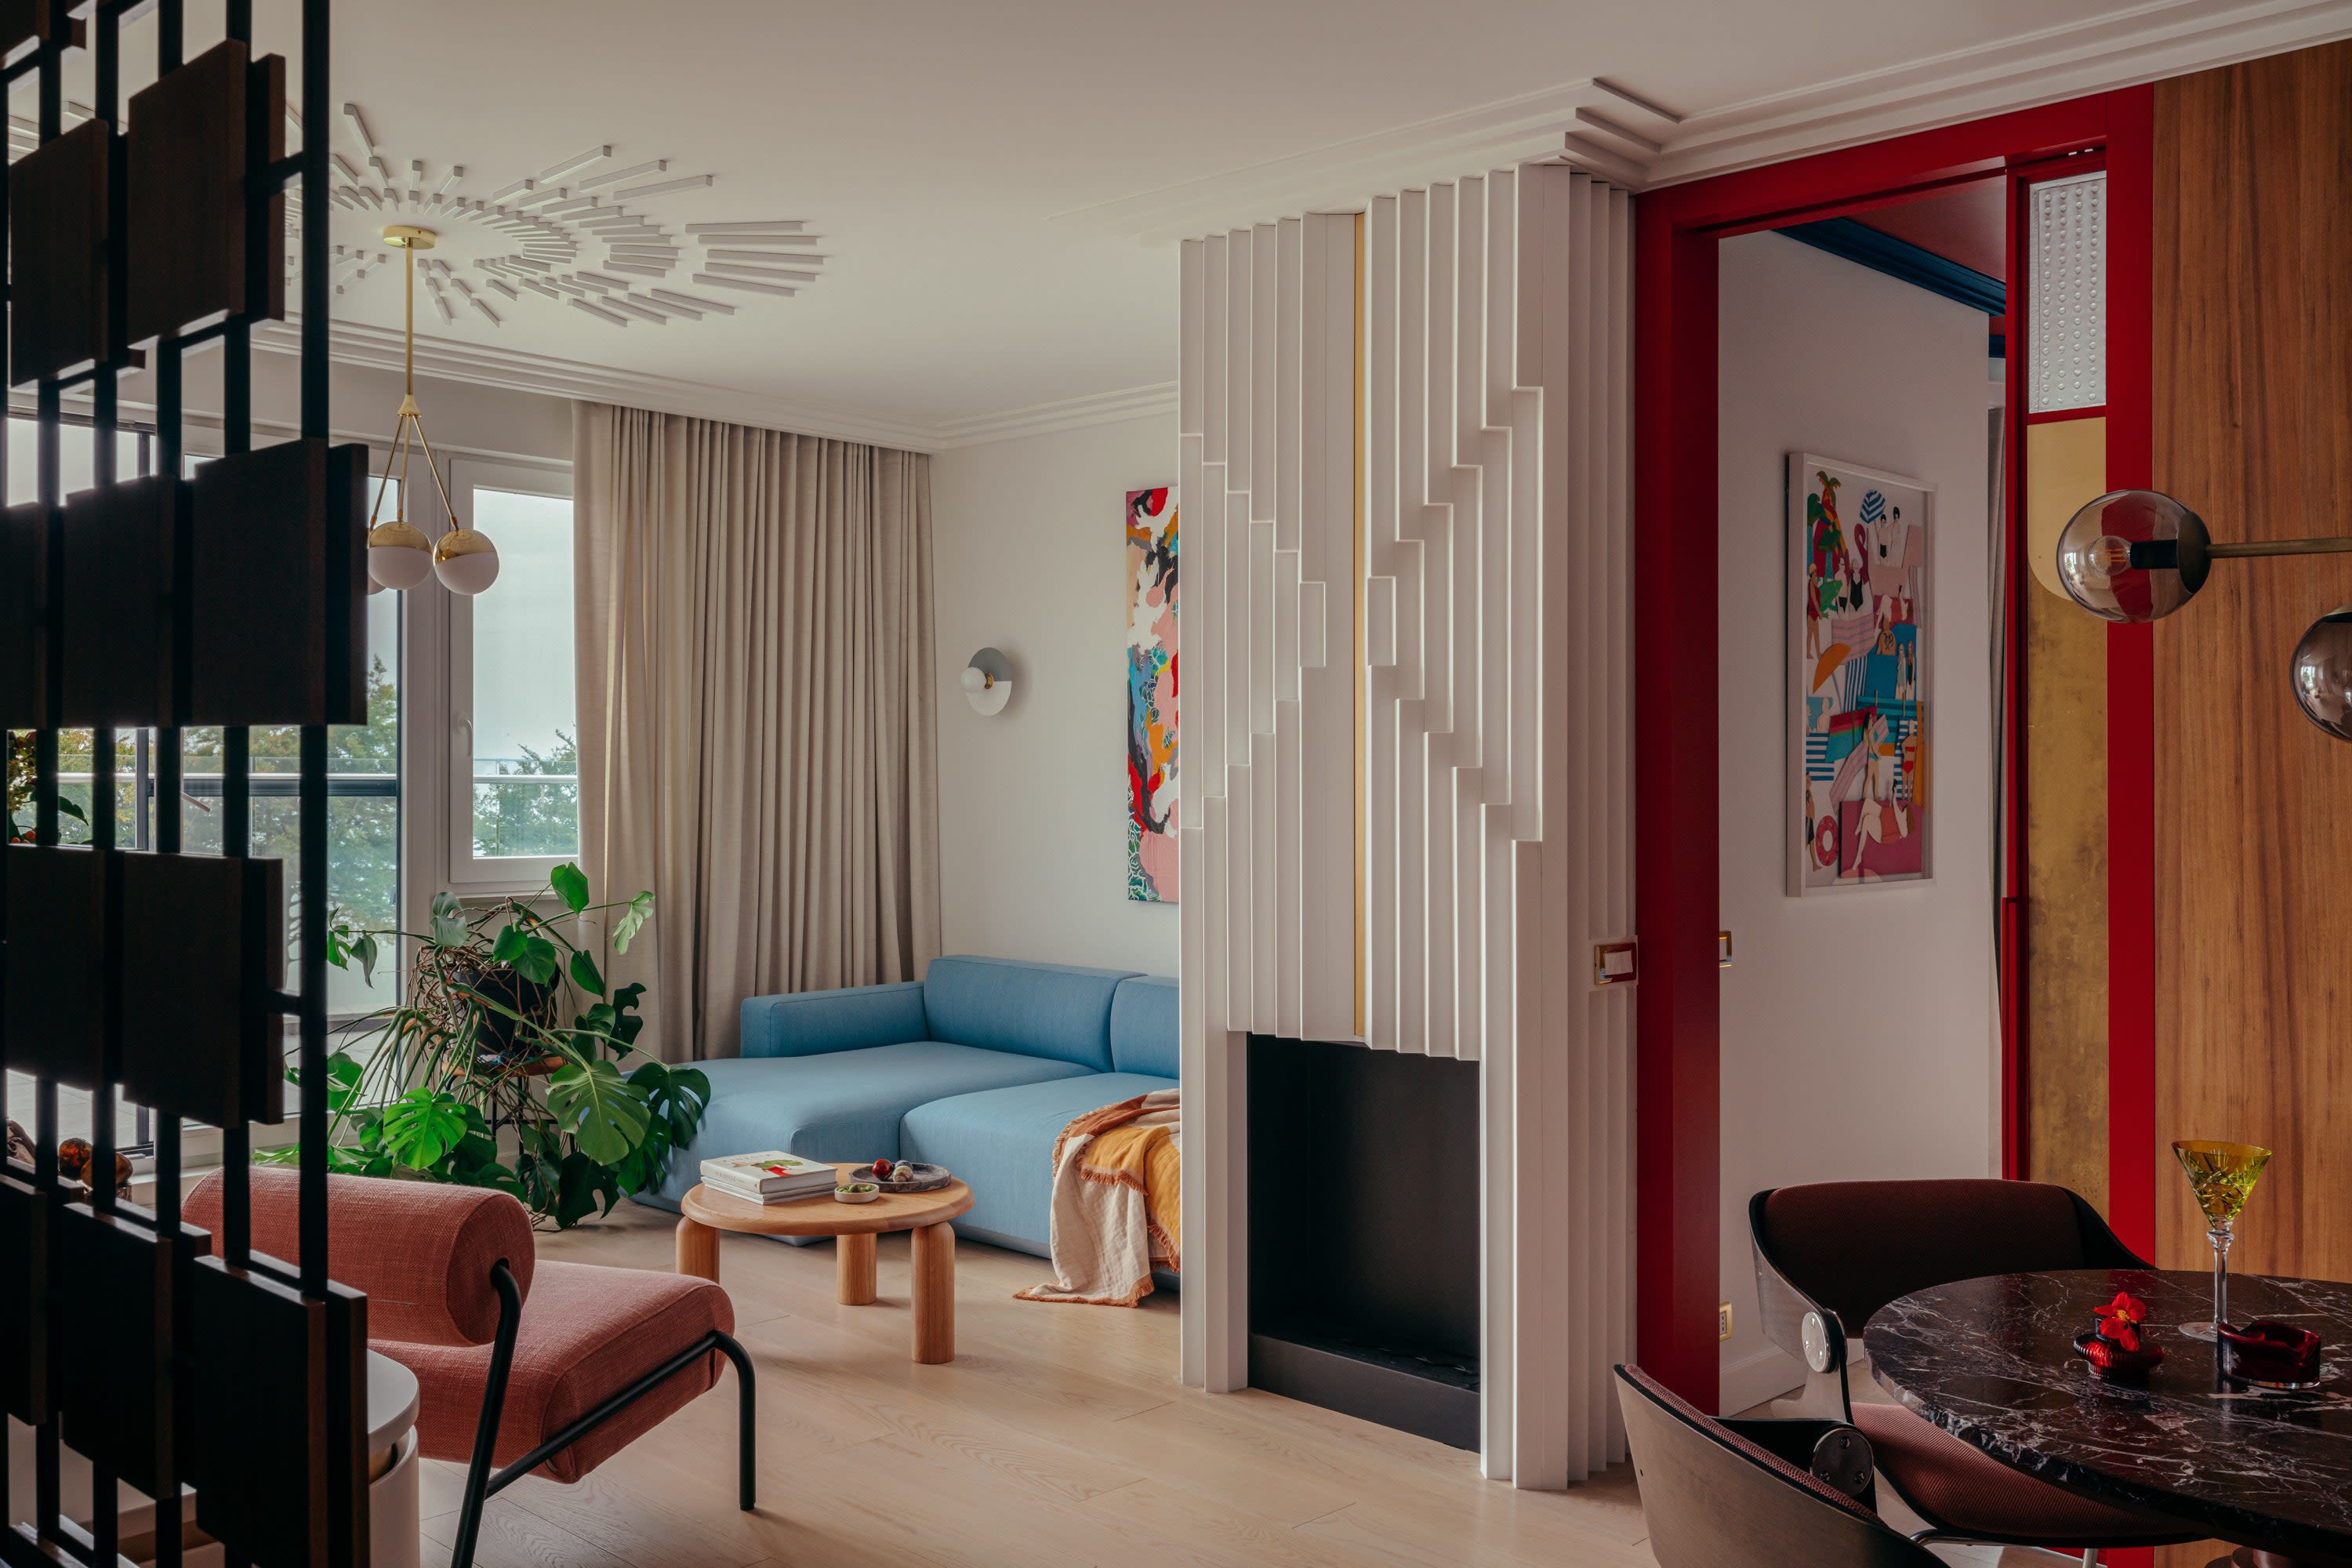 This 968-Square-Foot Seaside Home in Poland Is Full of Colorful Surprises